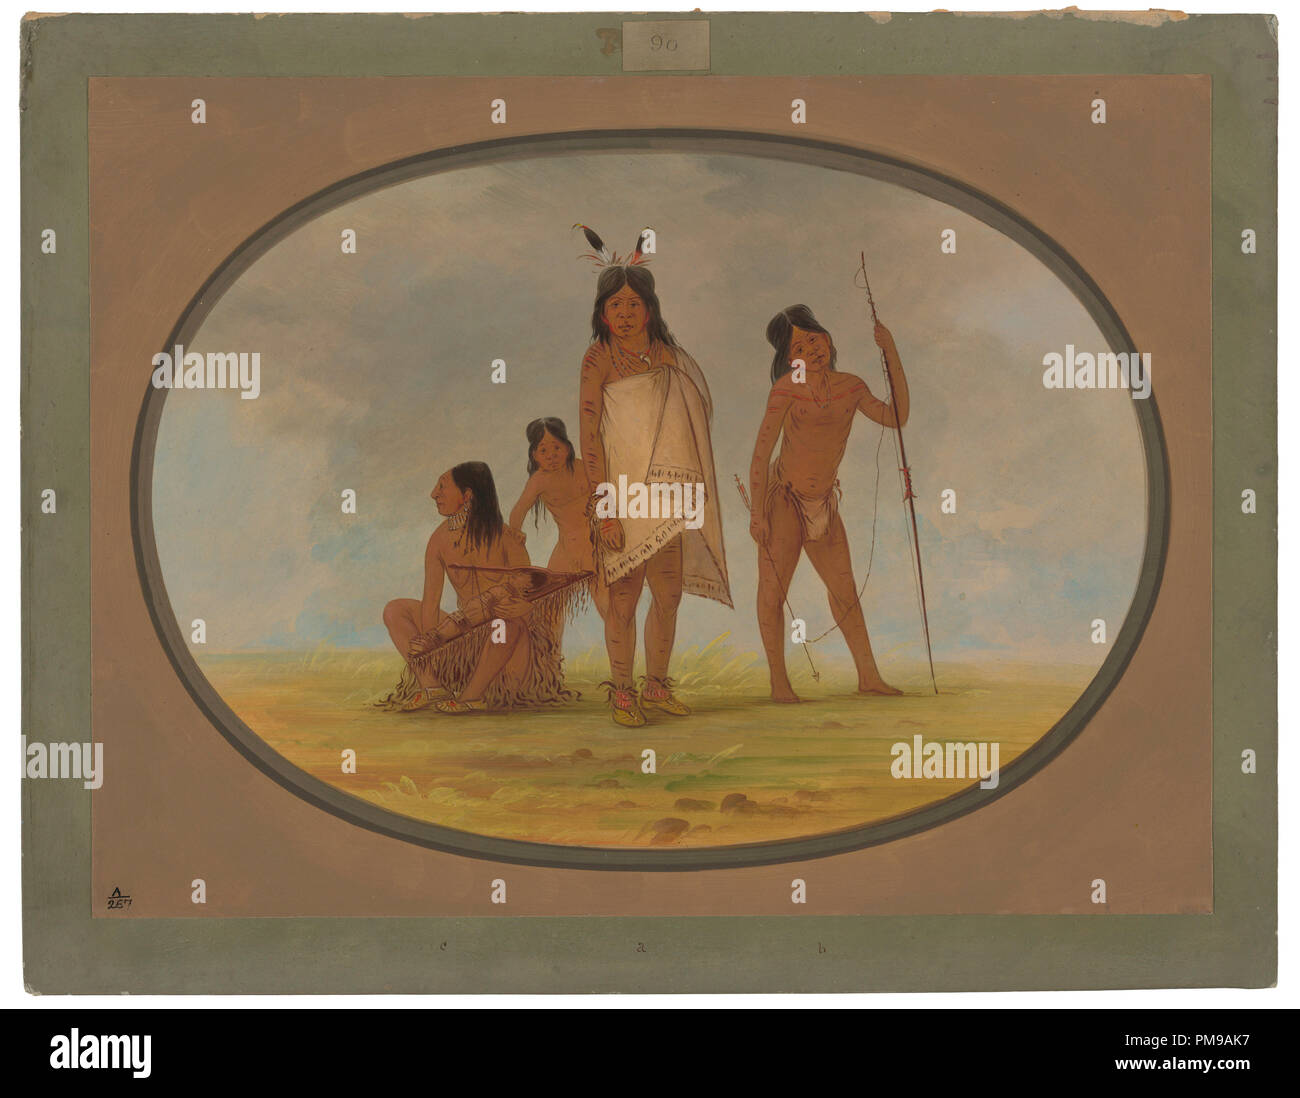 Four Flathead Indians. Dated: 1855/1869. Dimensions: overall: 47 x 62.8 cm (18 1/2 x 24 3/4 in.). Medium: oil on card mounted on paperboard. Museum: National Gallery of Art, Washington DC. Author: George Catlin. Stock Photo